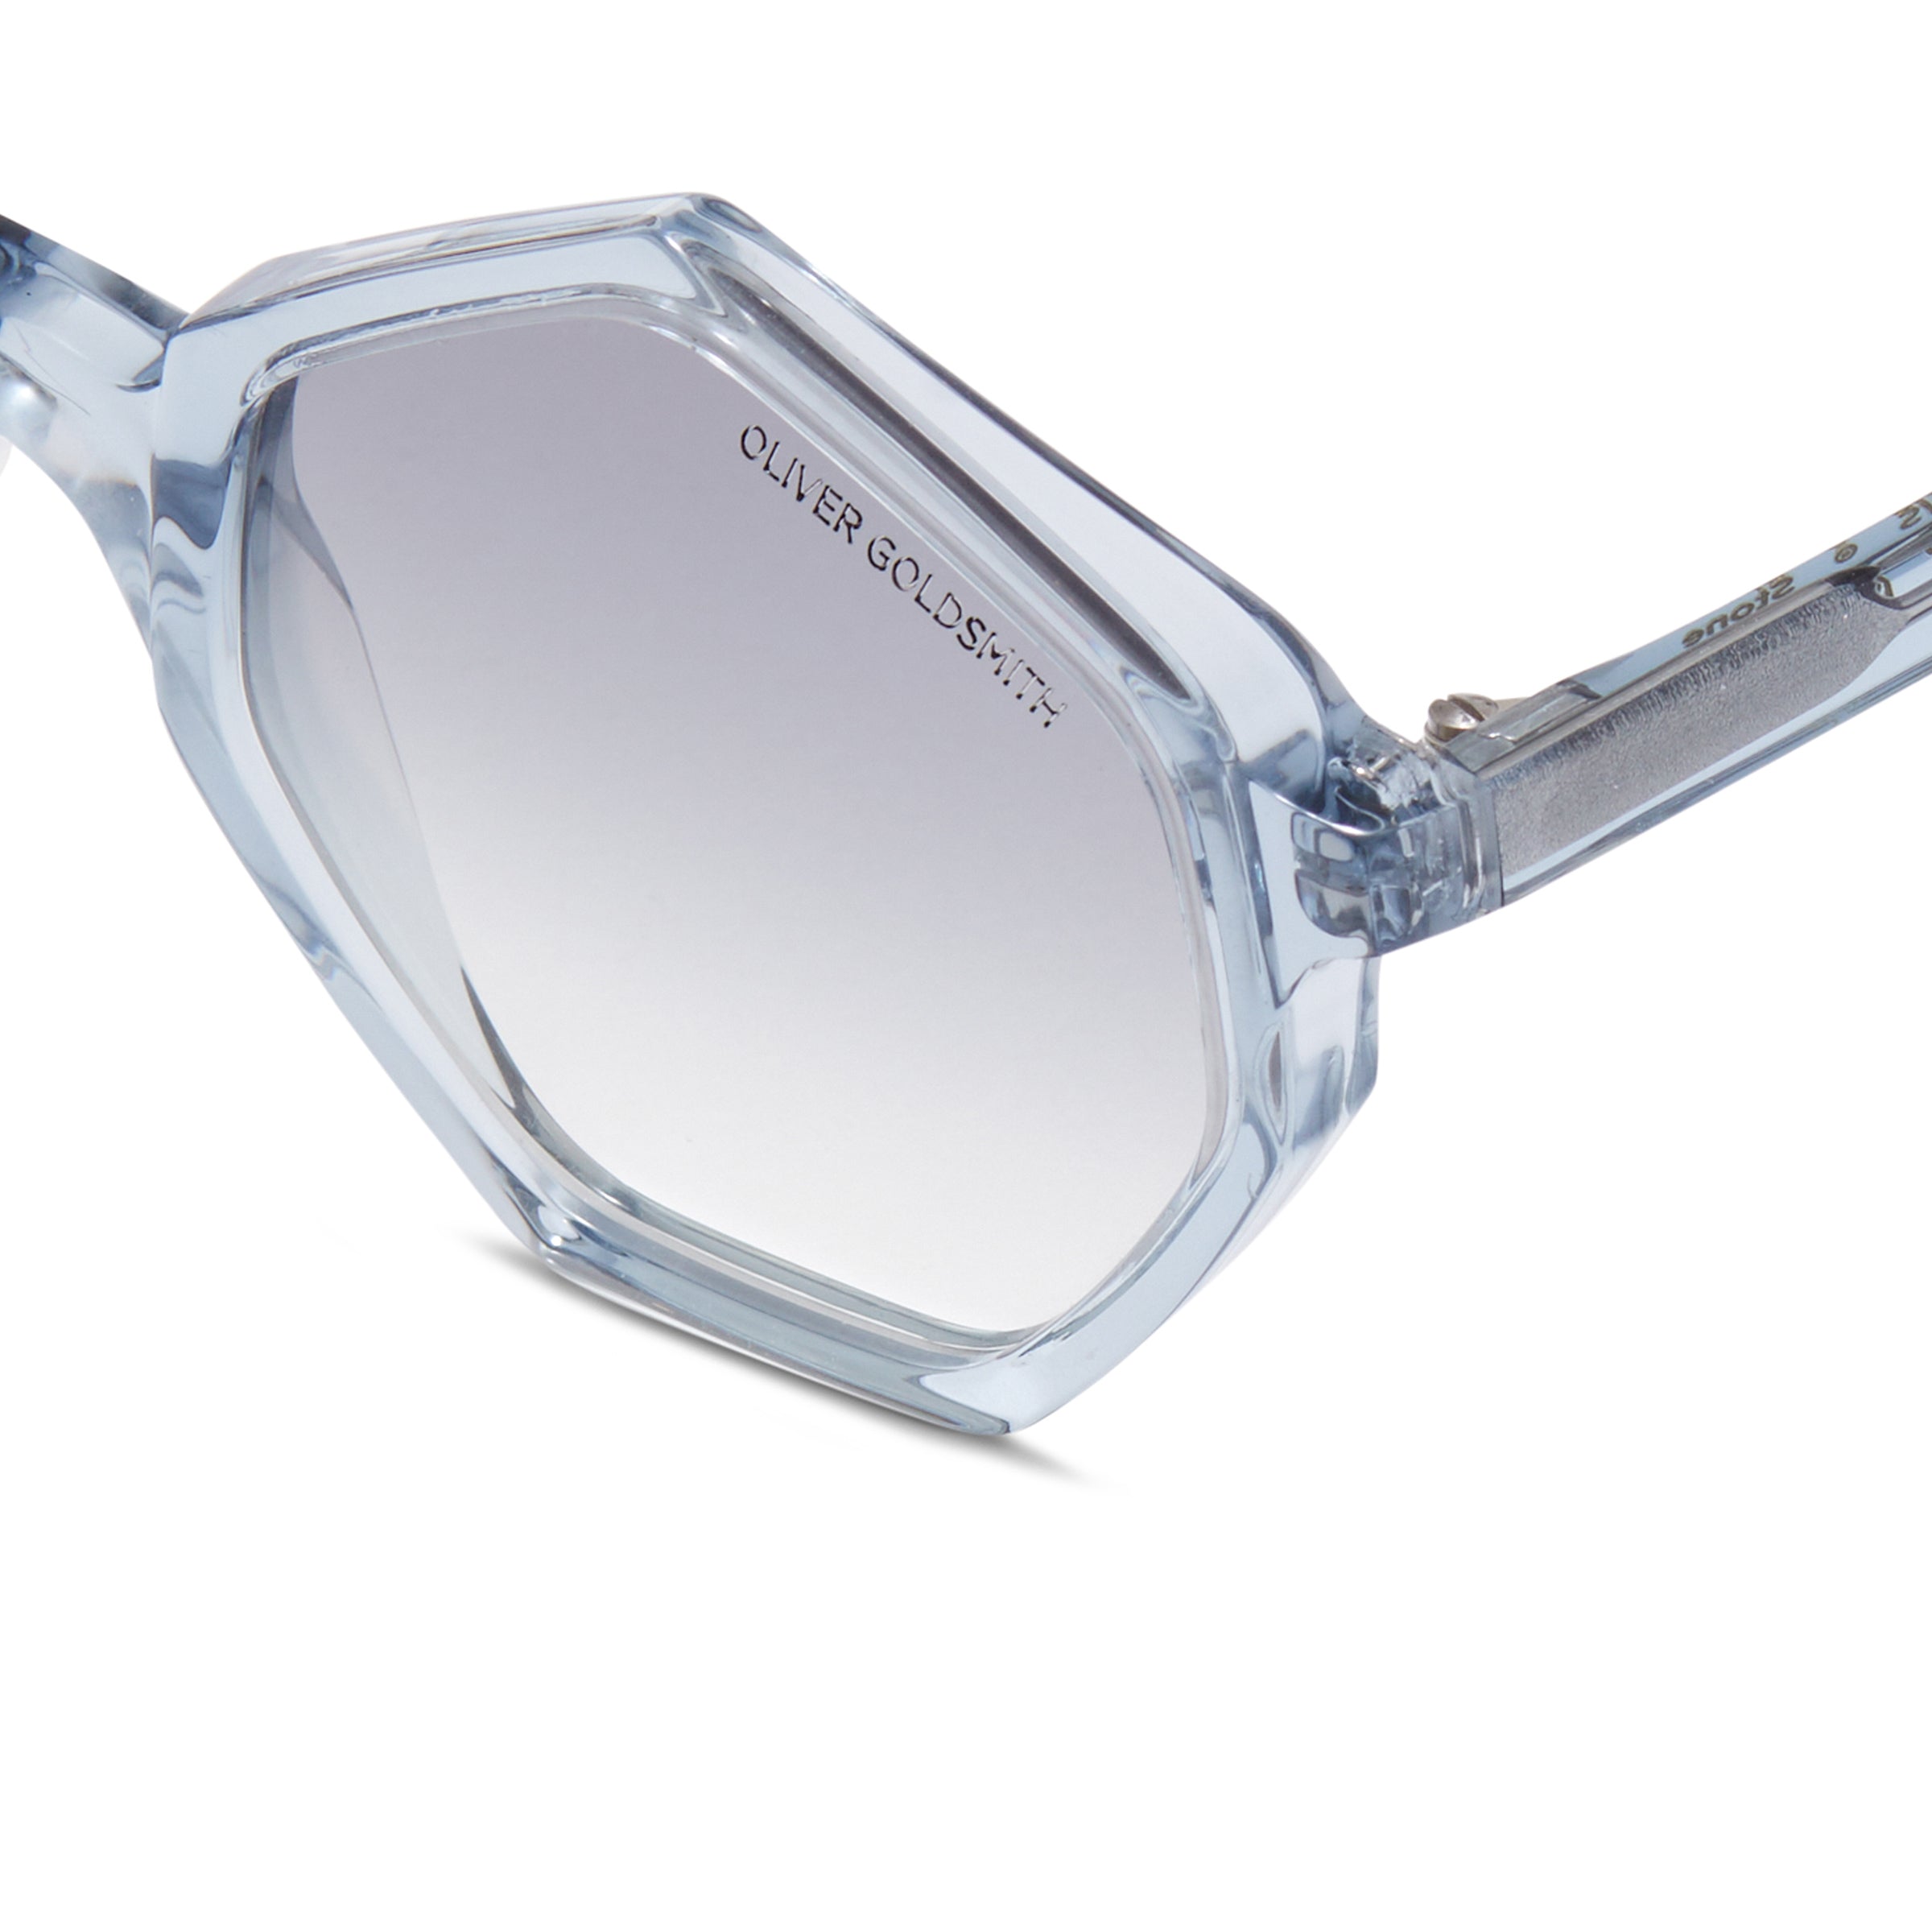 Women's Glasses Collection | Chic Sophistication | Oliver Goldsmith